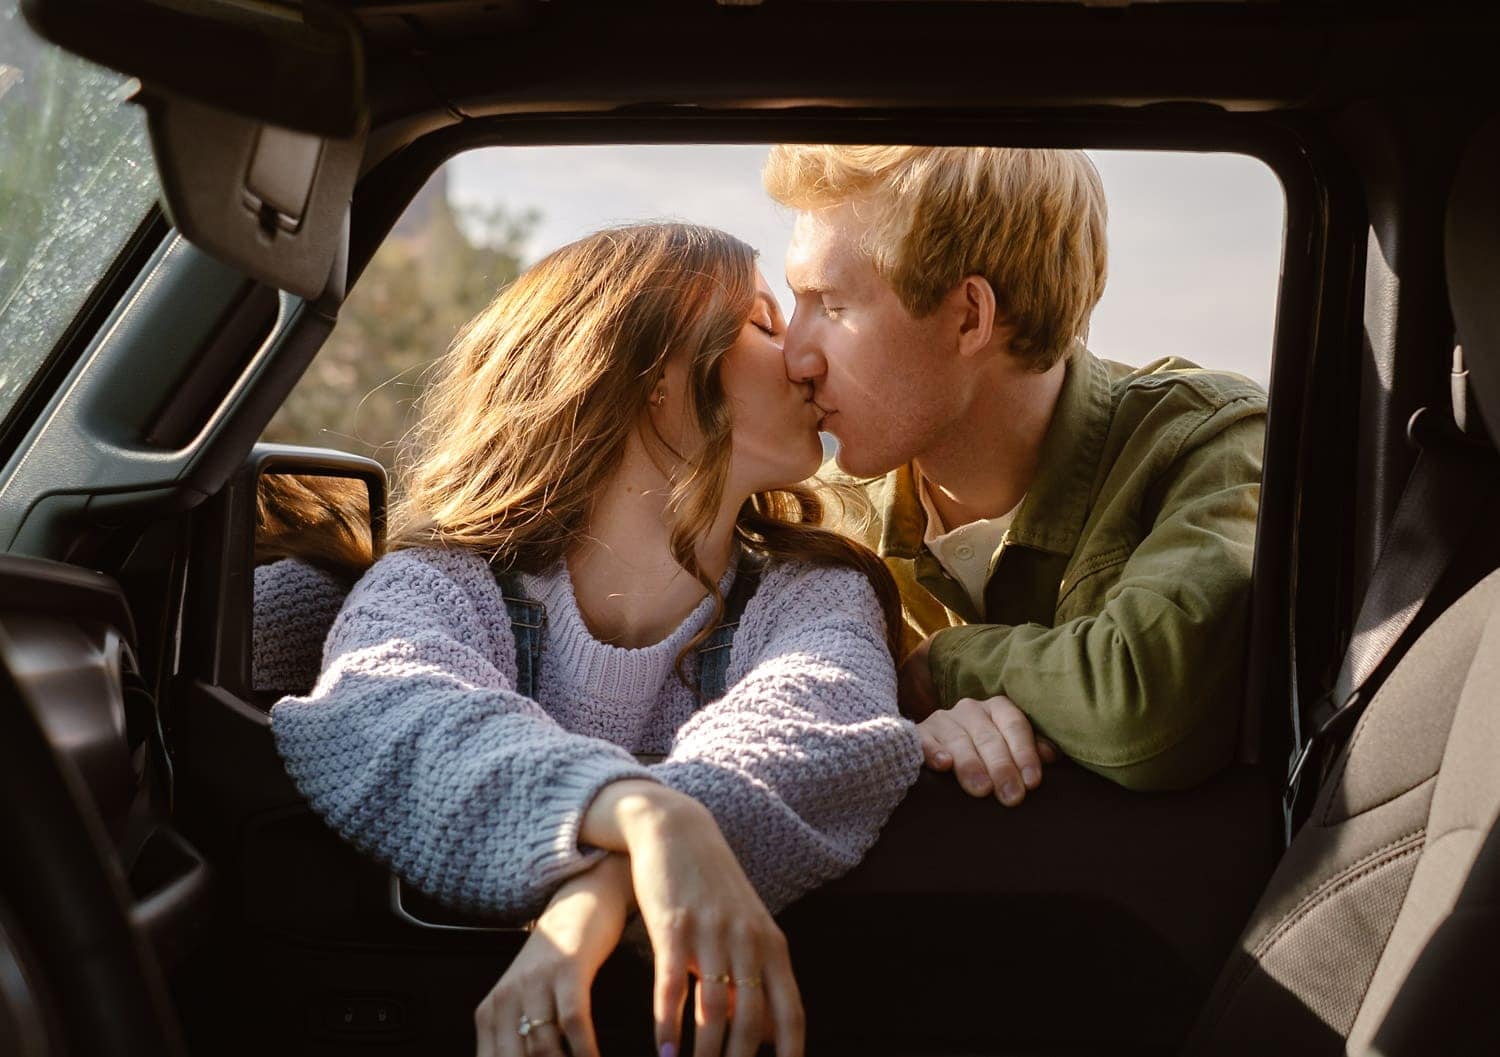 Two people share a kiss inside a vehicle, with natural light illuminating the intimate moment.